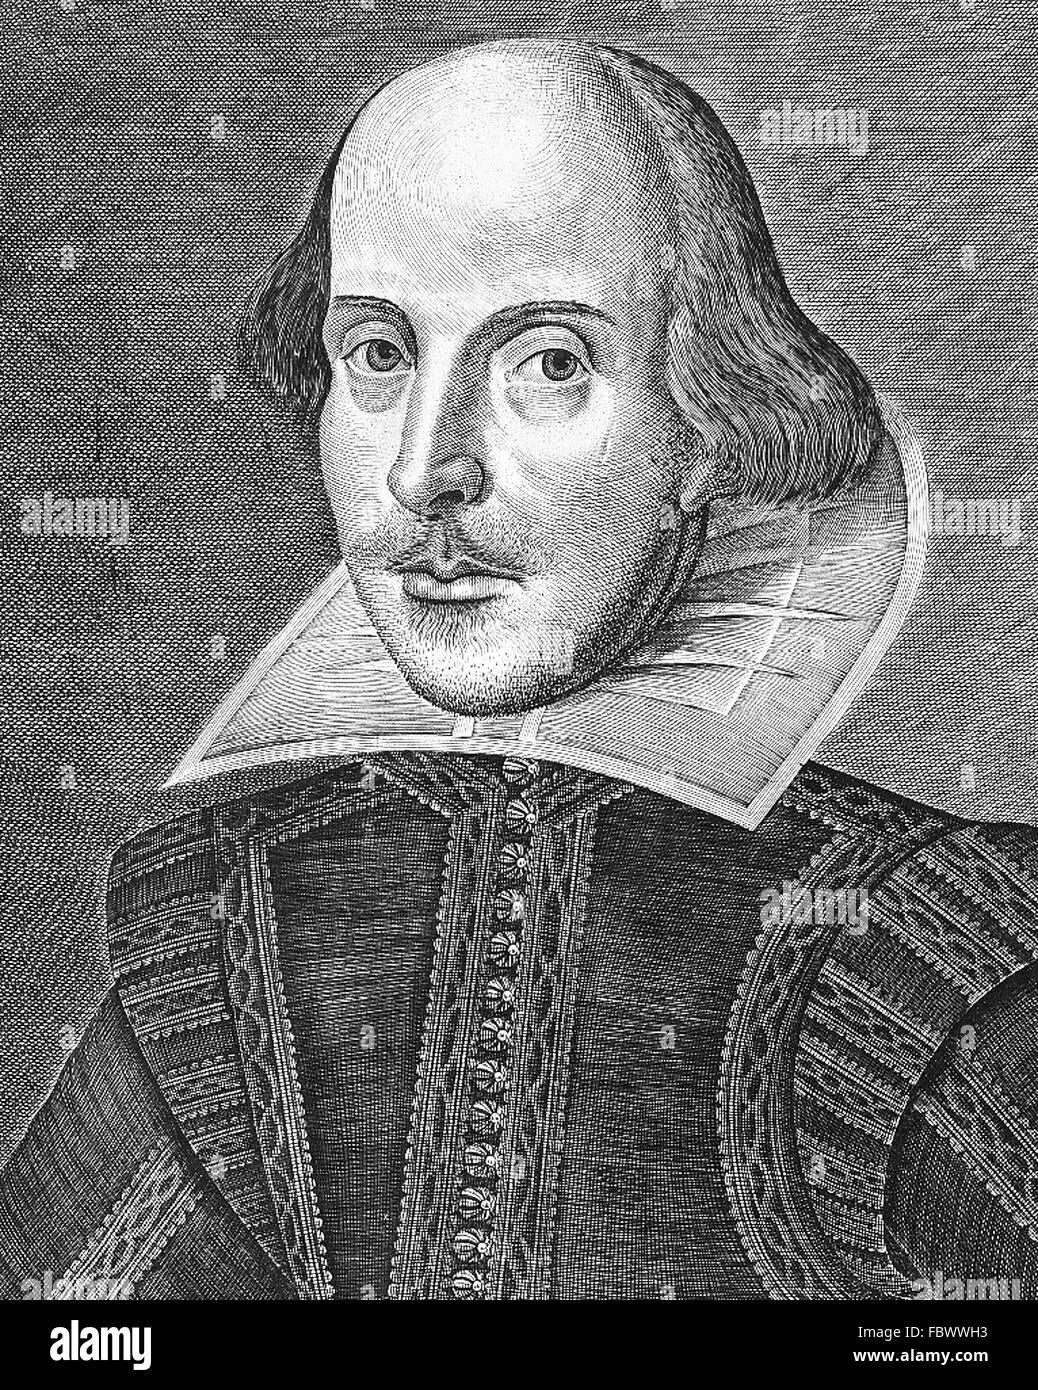 Shakespeare, Portrait. Copper engraving of William Shakespeare by Martin Droeshout from the title page of the First Folio, published in 1623 Stock Photo